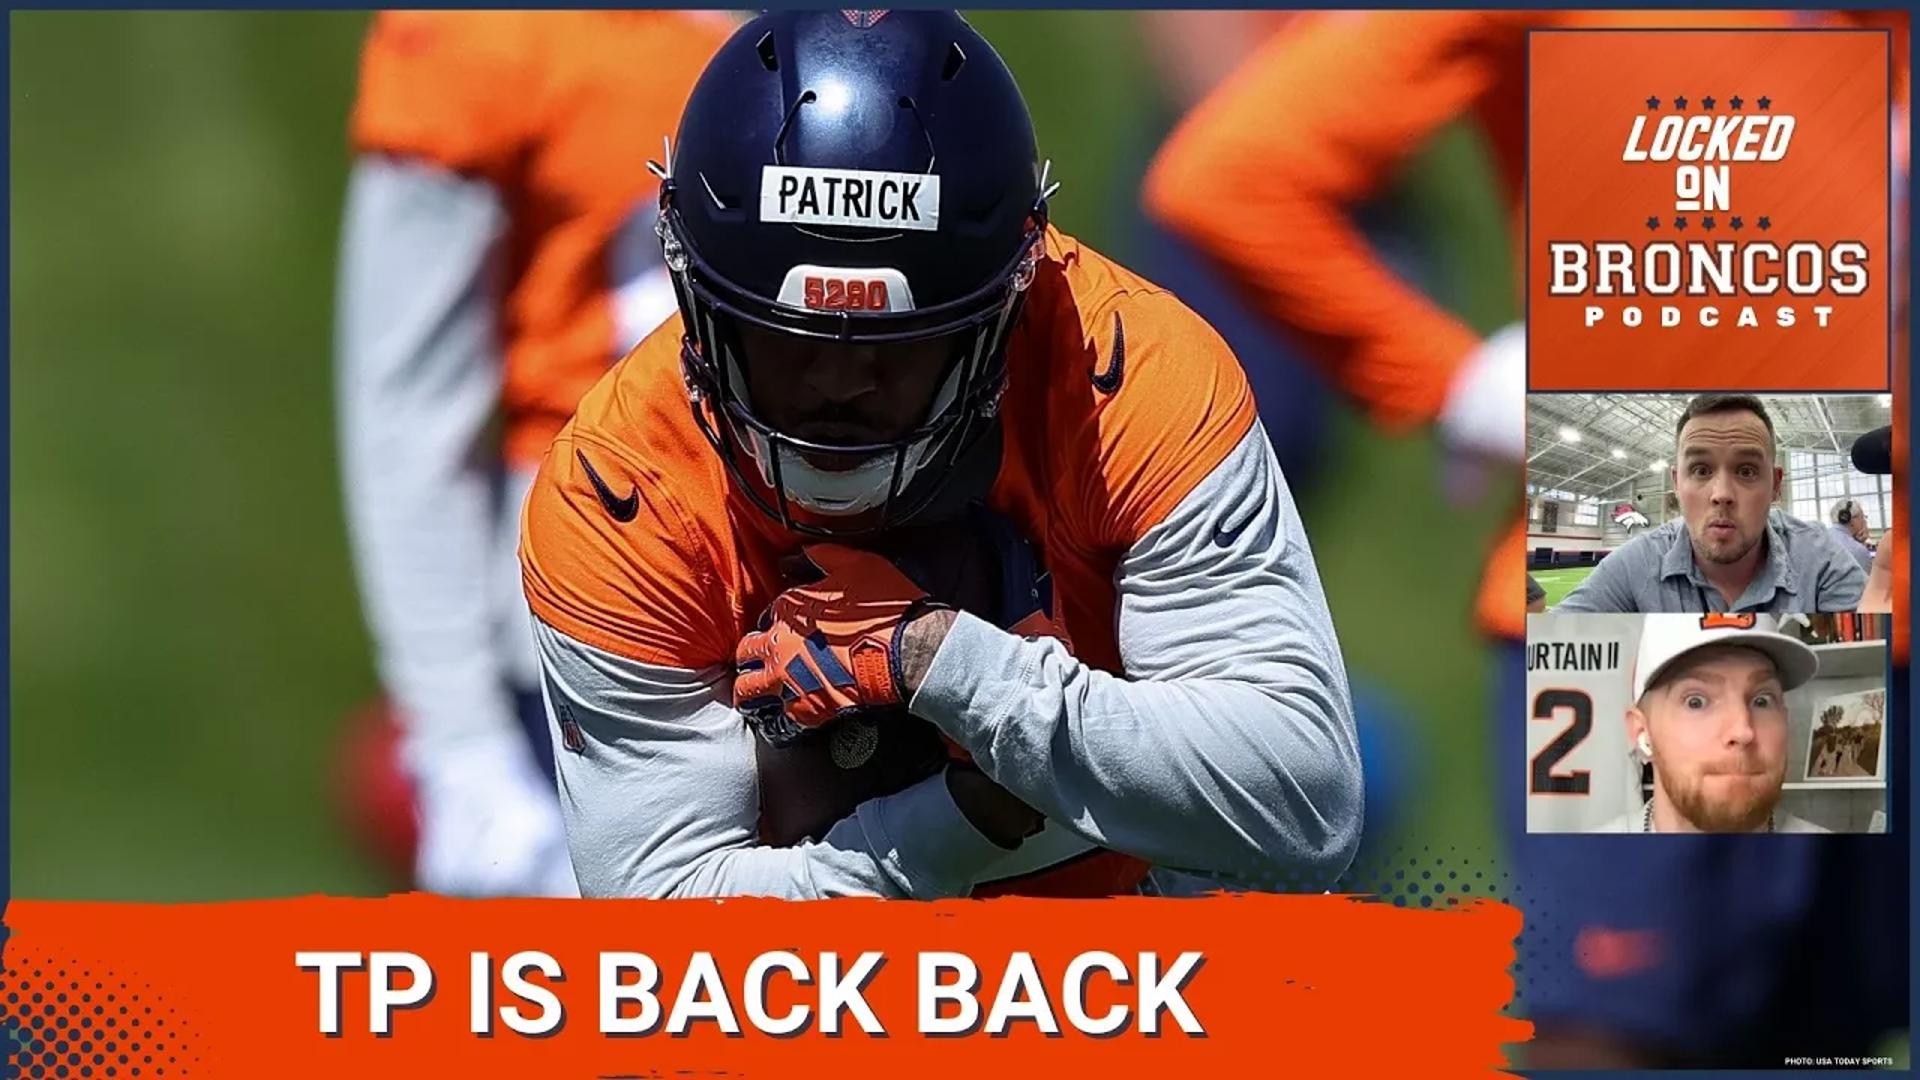 Denver Broncos mandatory minicamp kicked off on Tuesday with Tim Patrick standing out in a big way with Bo Nix and Jarrett Stidham.